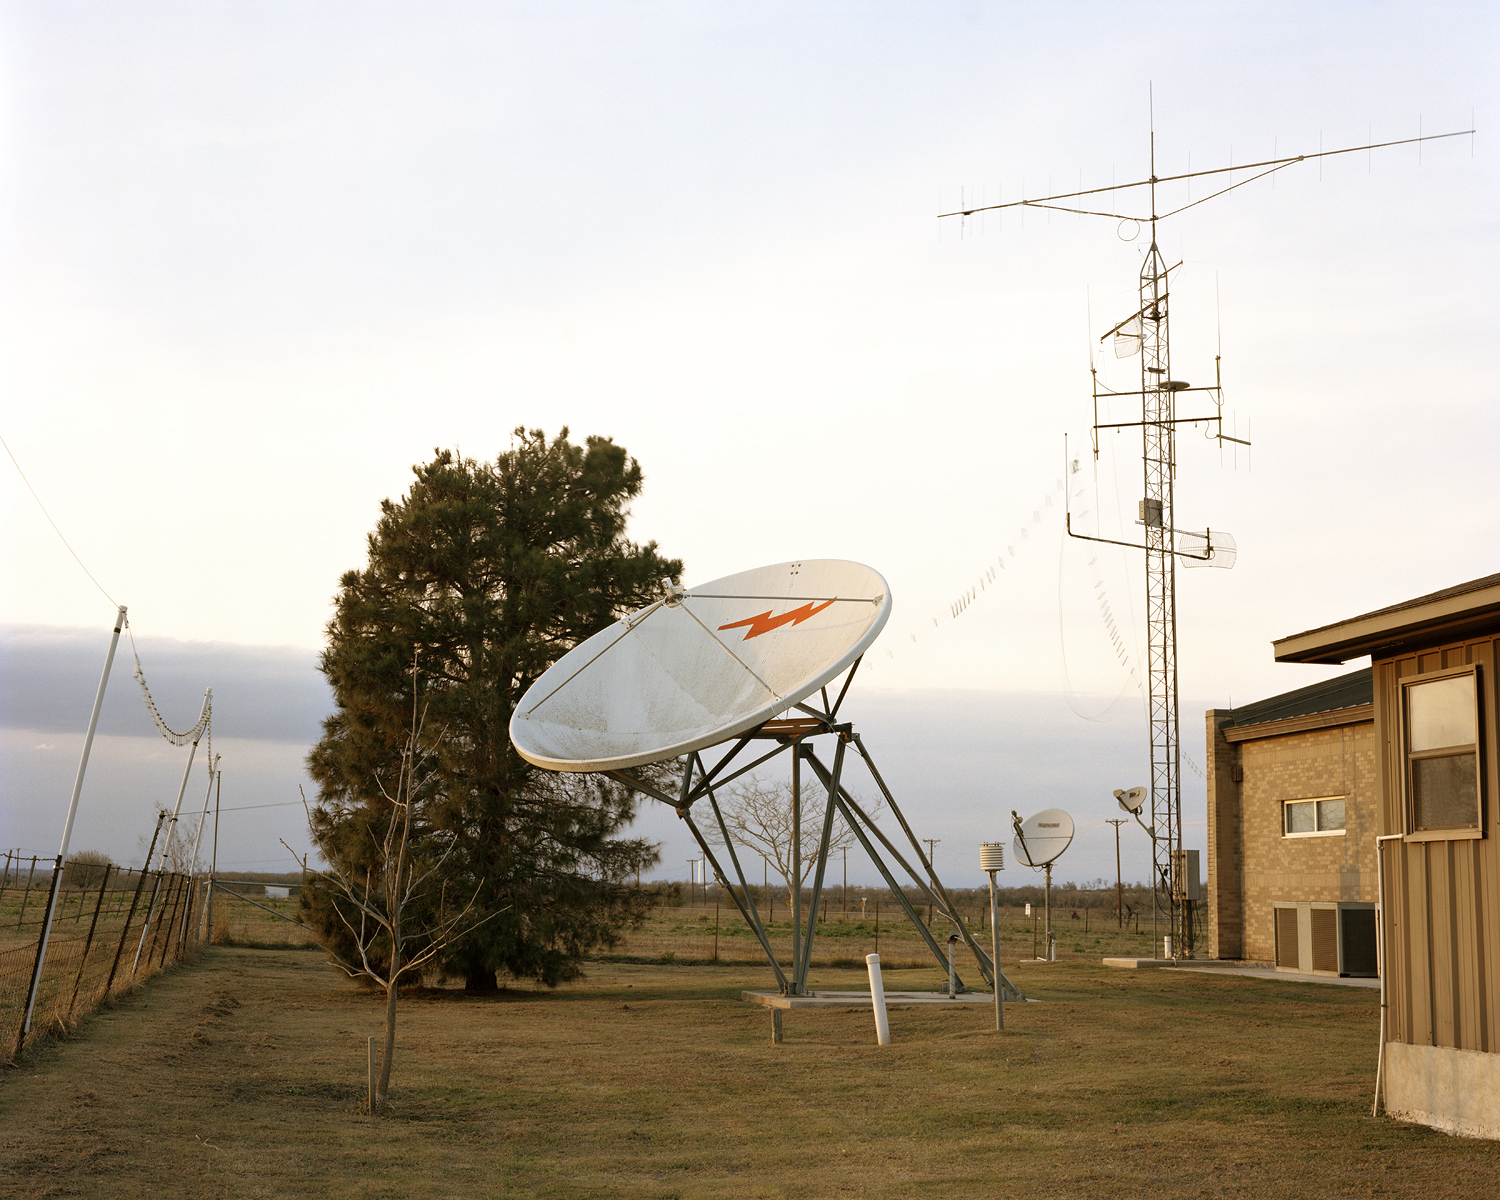 radio signal dish outside of building with adjacent antenna